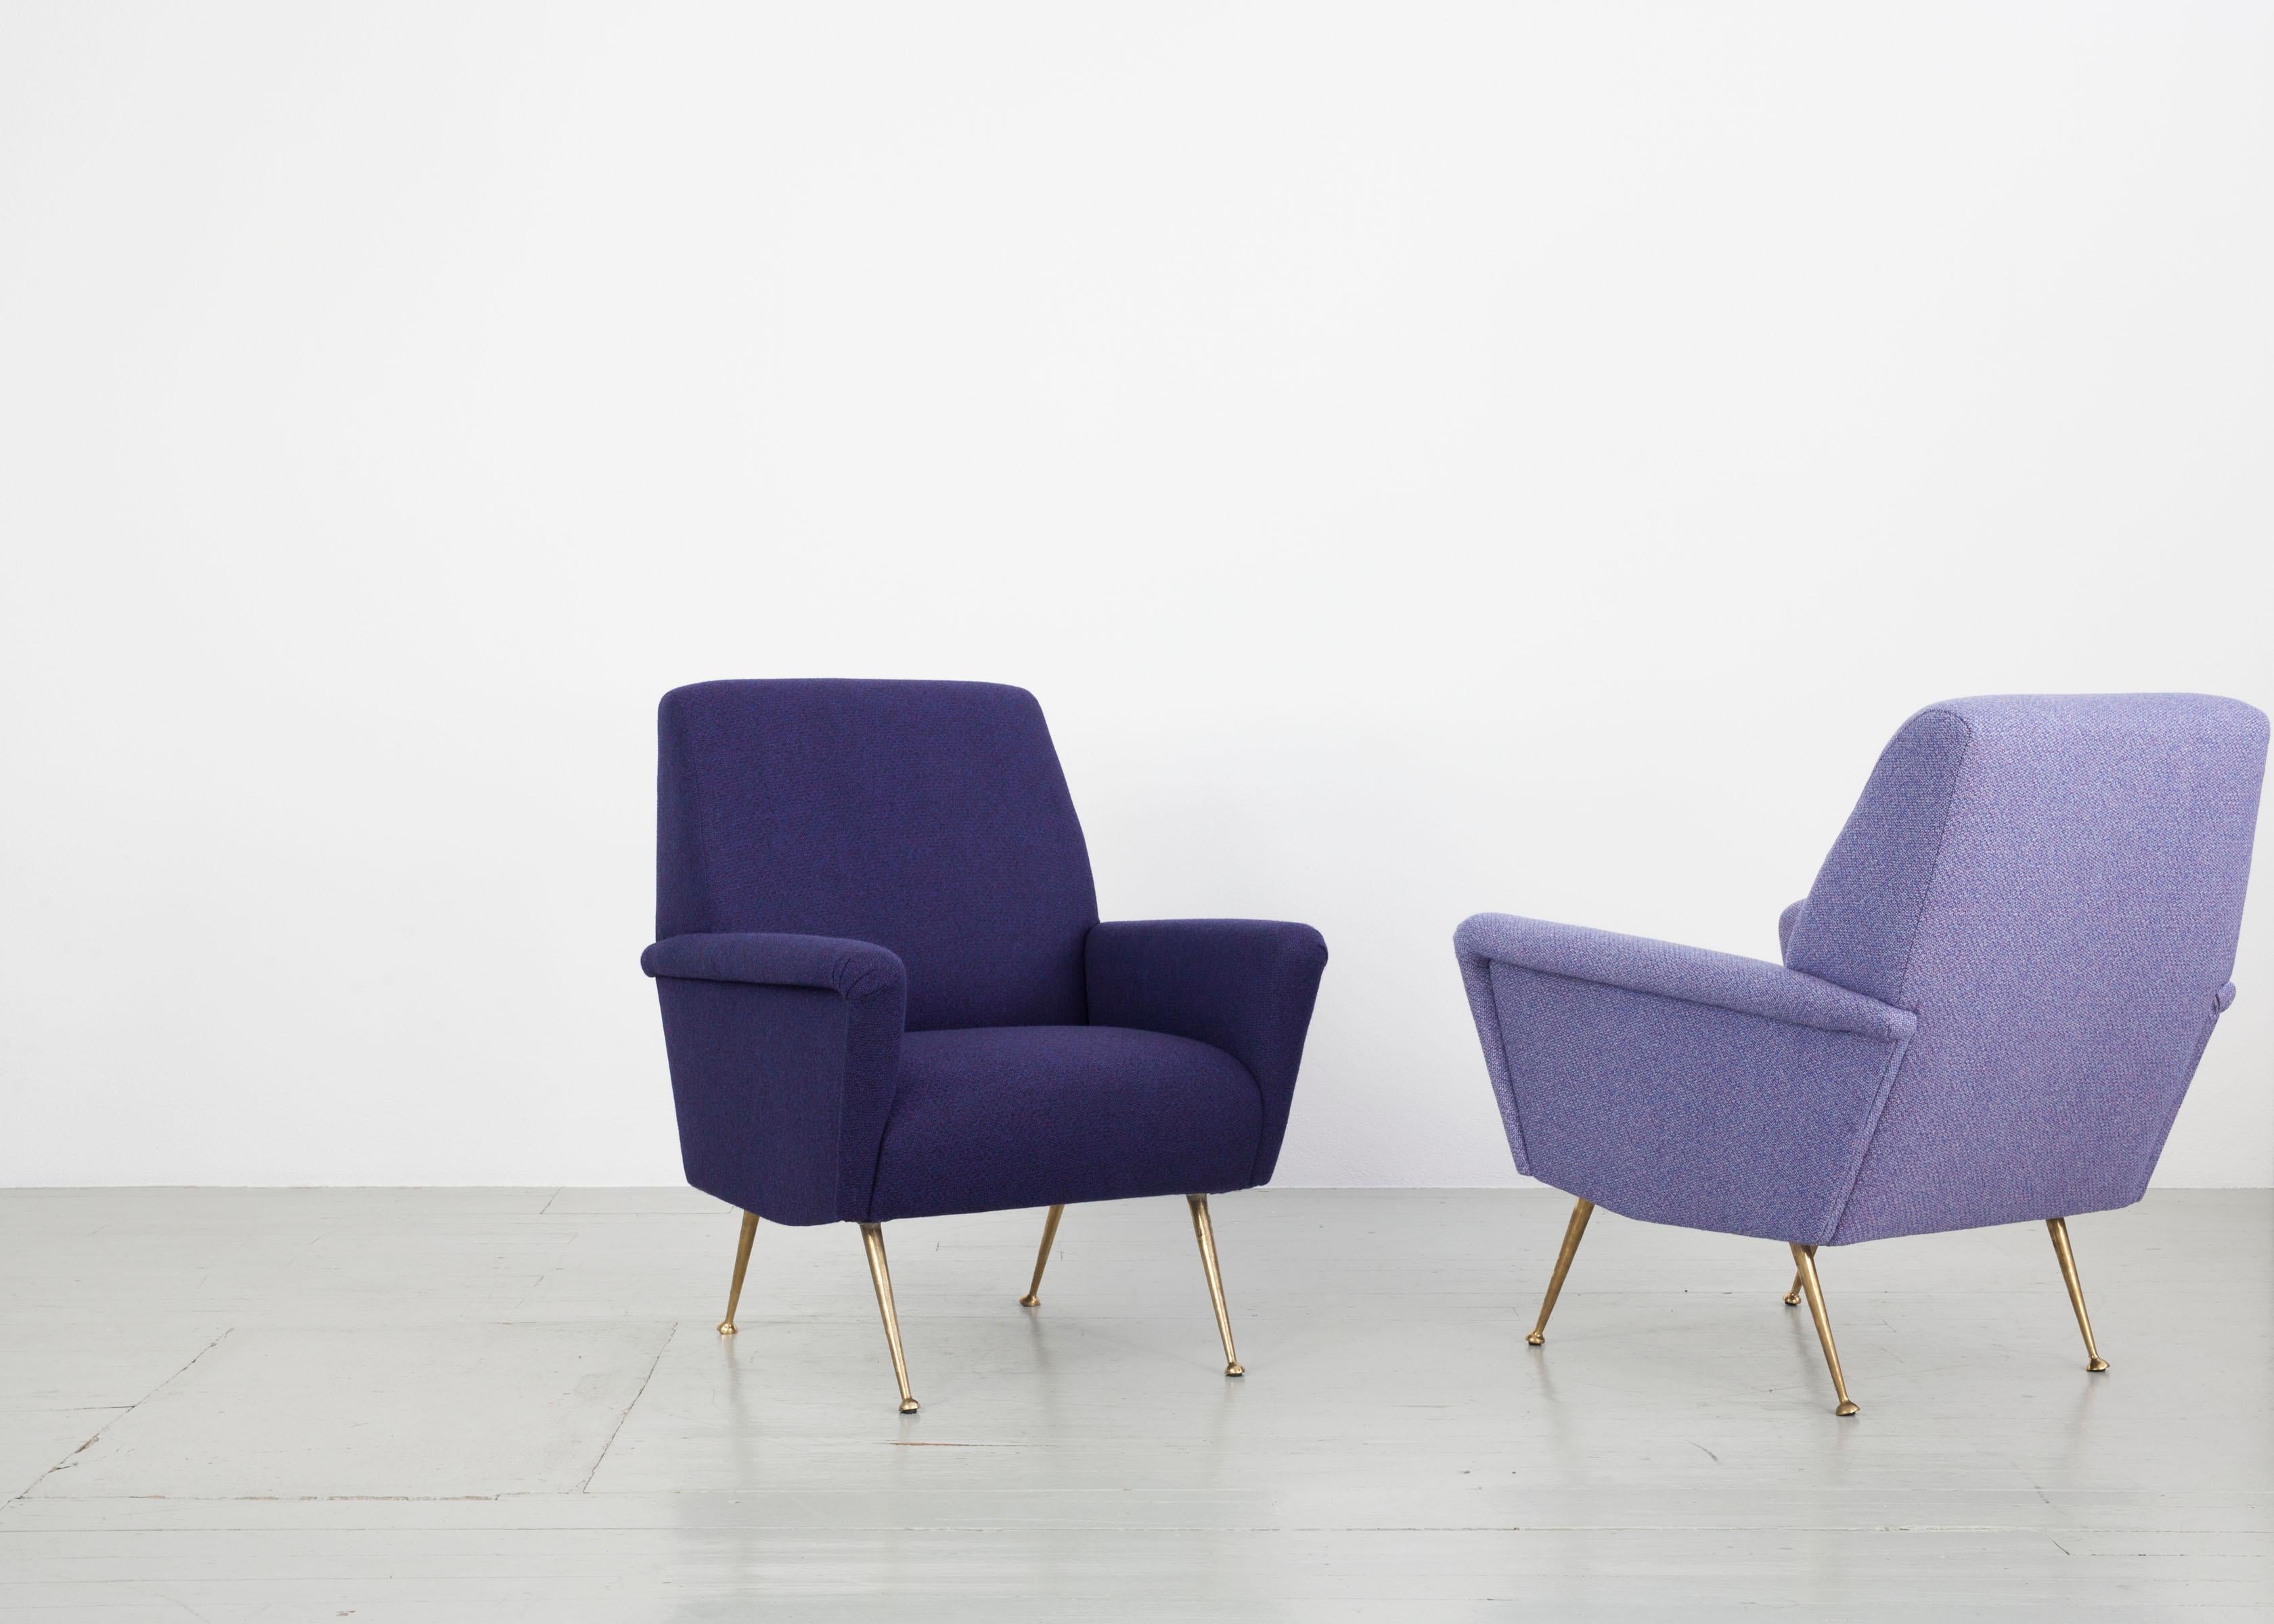 This pair of armchairs was made in Italy in the 1950s. Both pieces of furniture have been reupholstered with a woolen fabric by the Backhausen company in light and dark purple. The body is supported by thin, golden chair legs that show a slight